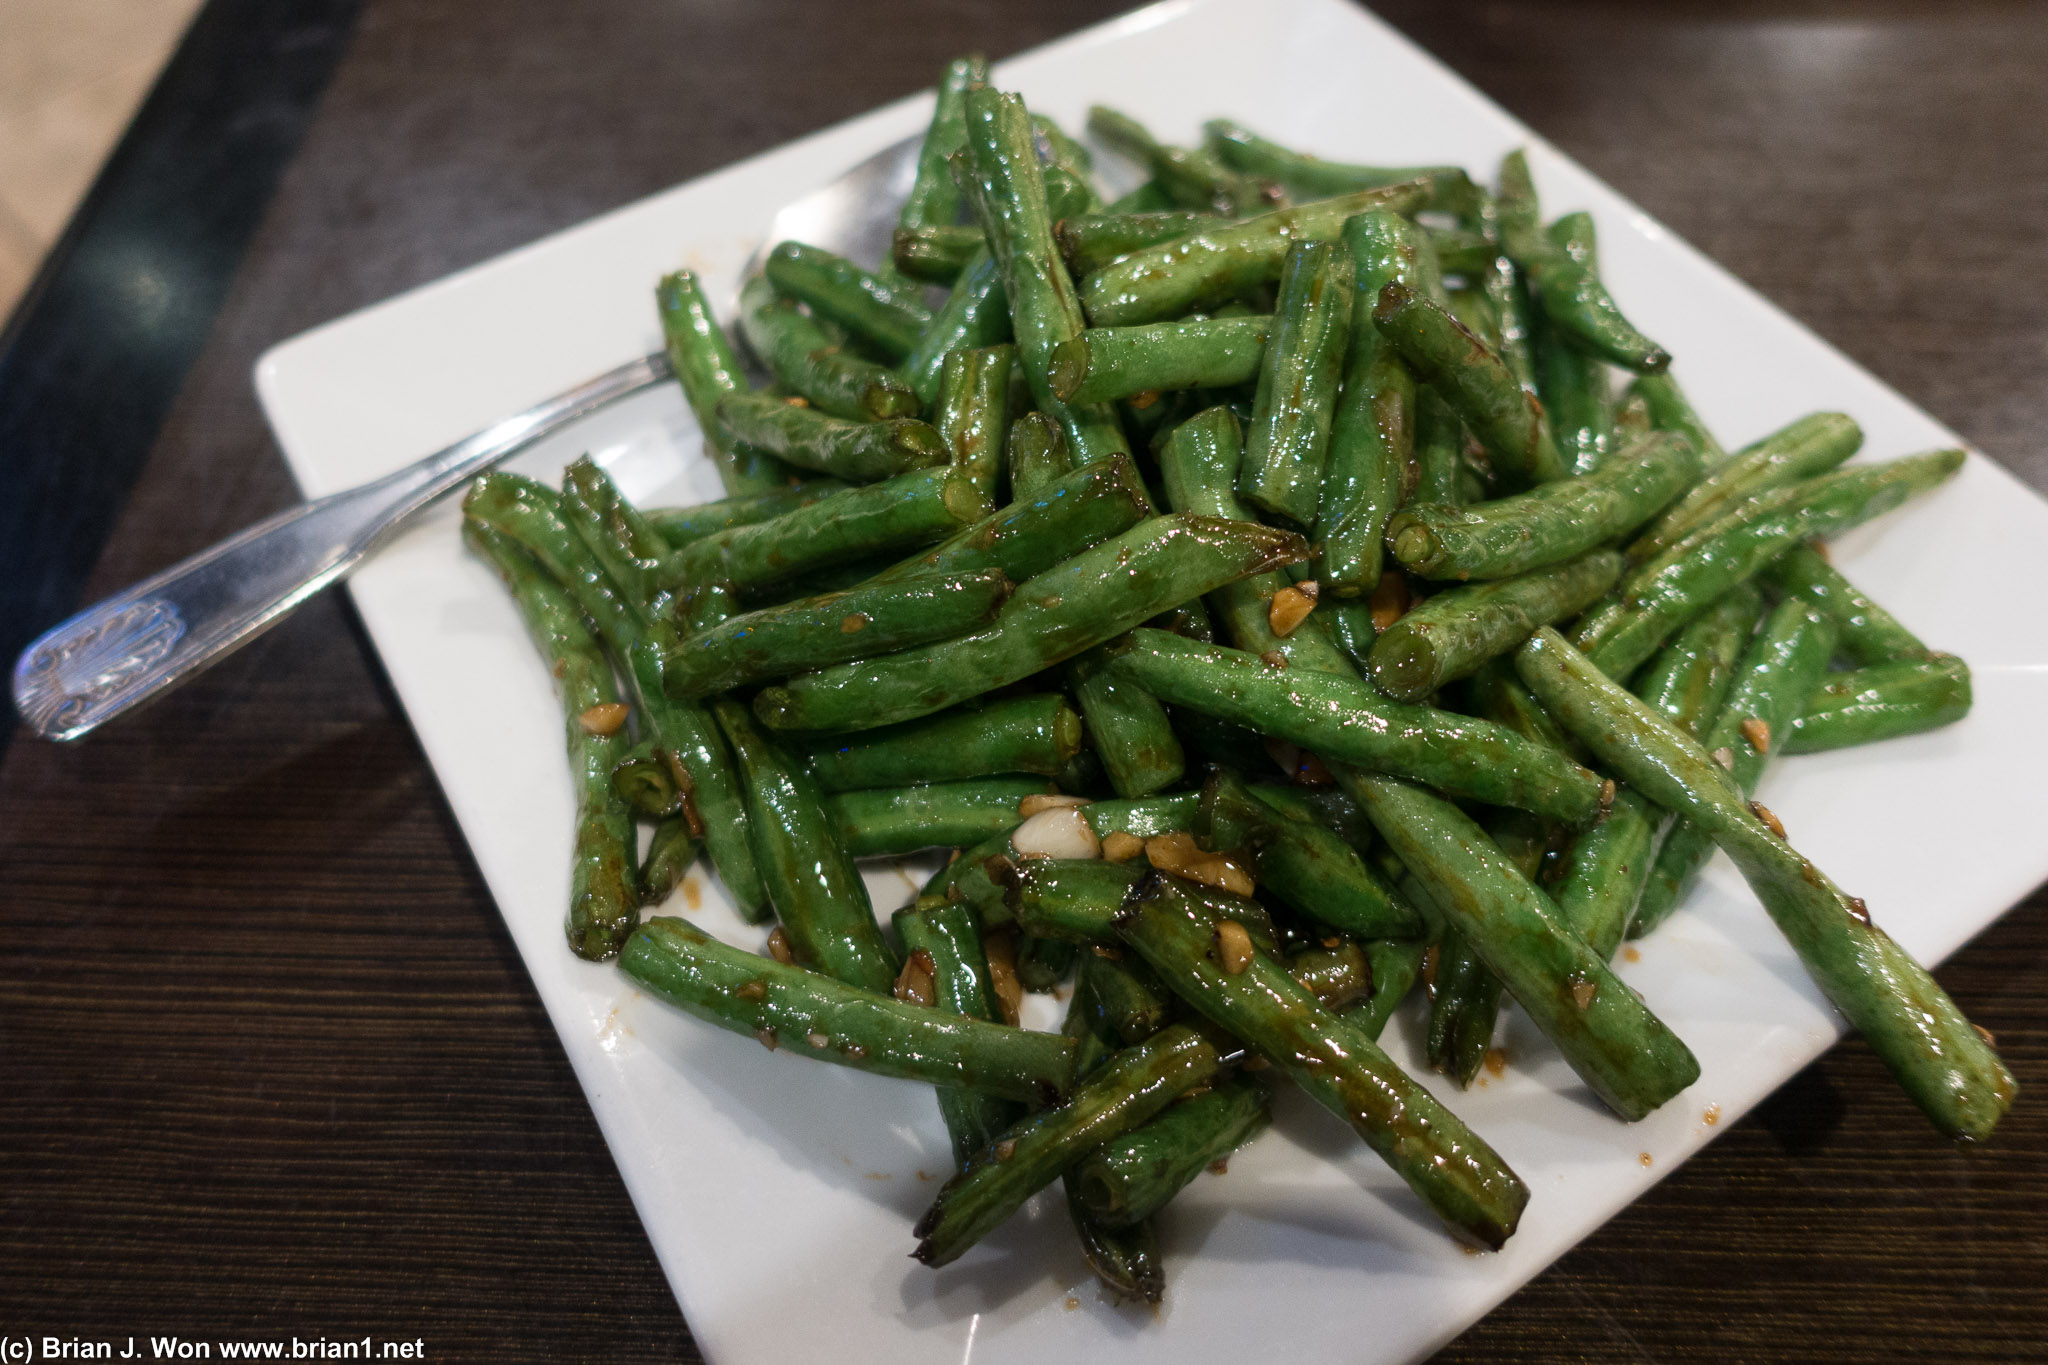 Green beans were old and tough at Izzo.